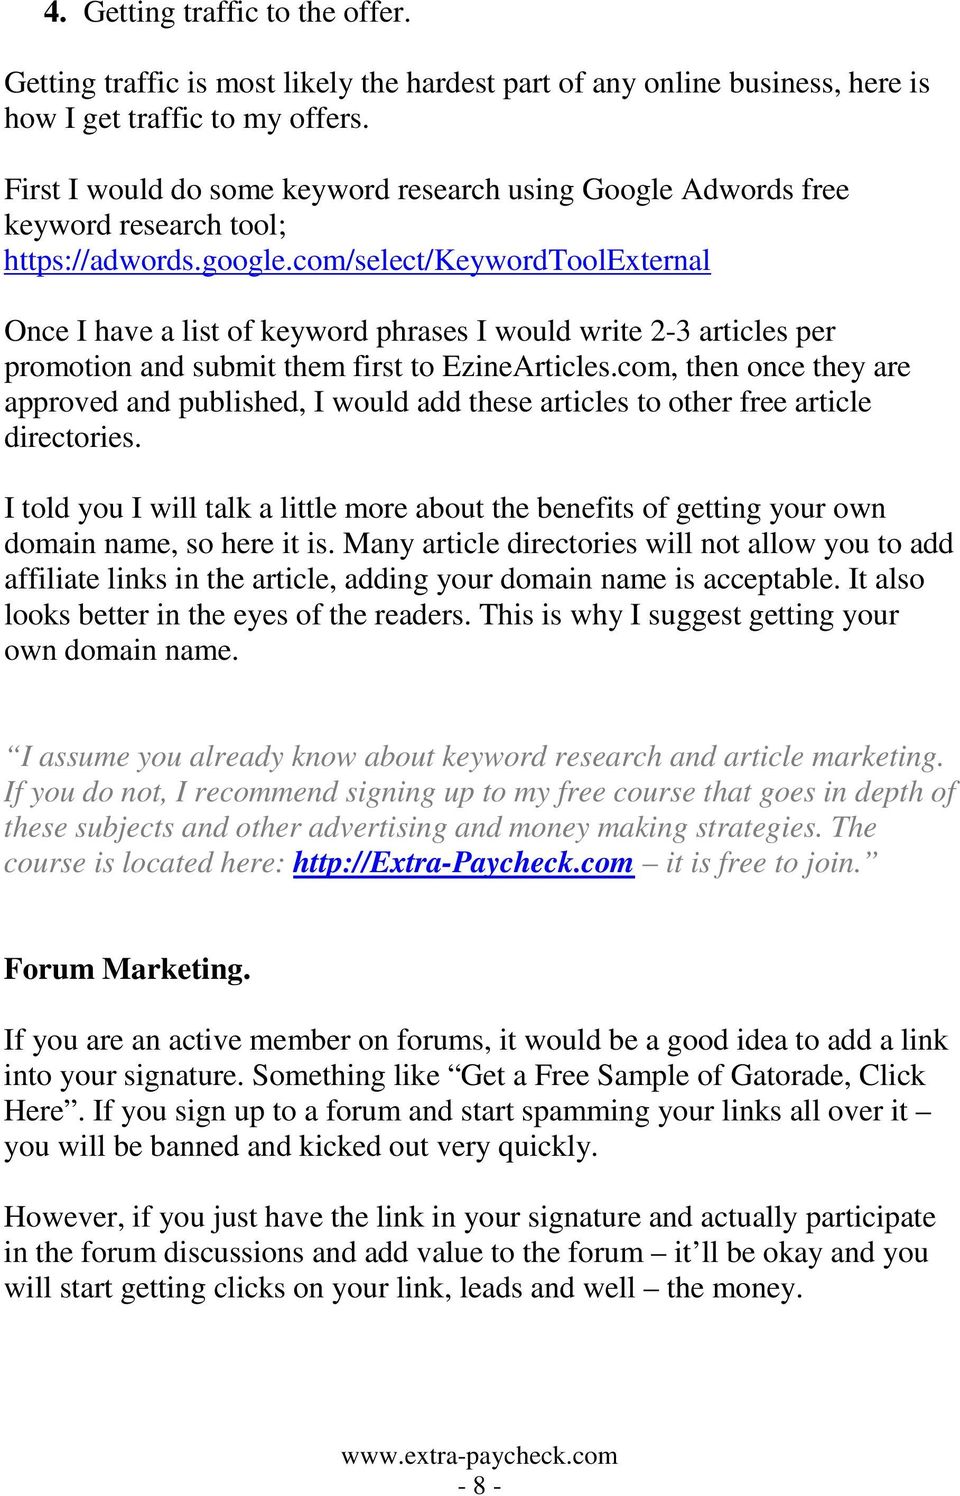 com/select/keywordtoolexternal Once I have a list of keyword phrases I would write 2-3 articles per promotion and submit them first to EzineArticles.